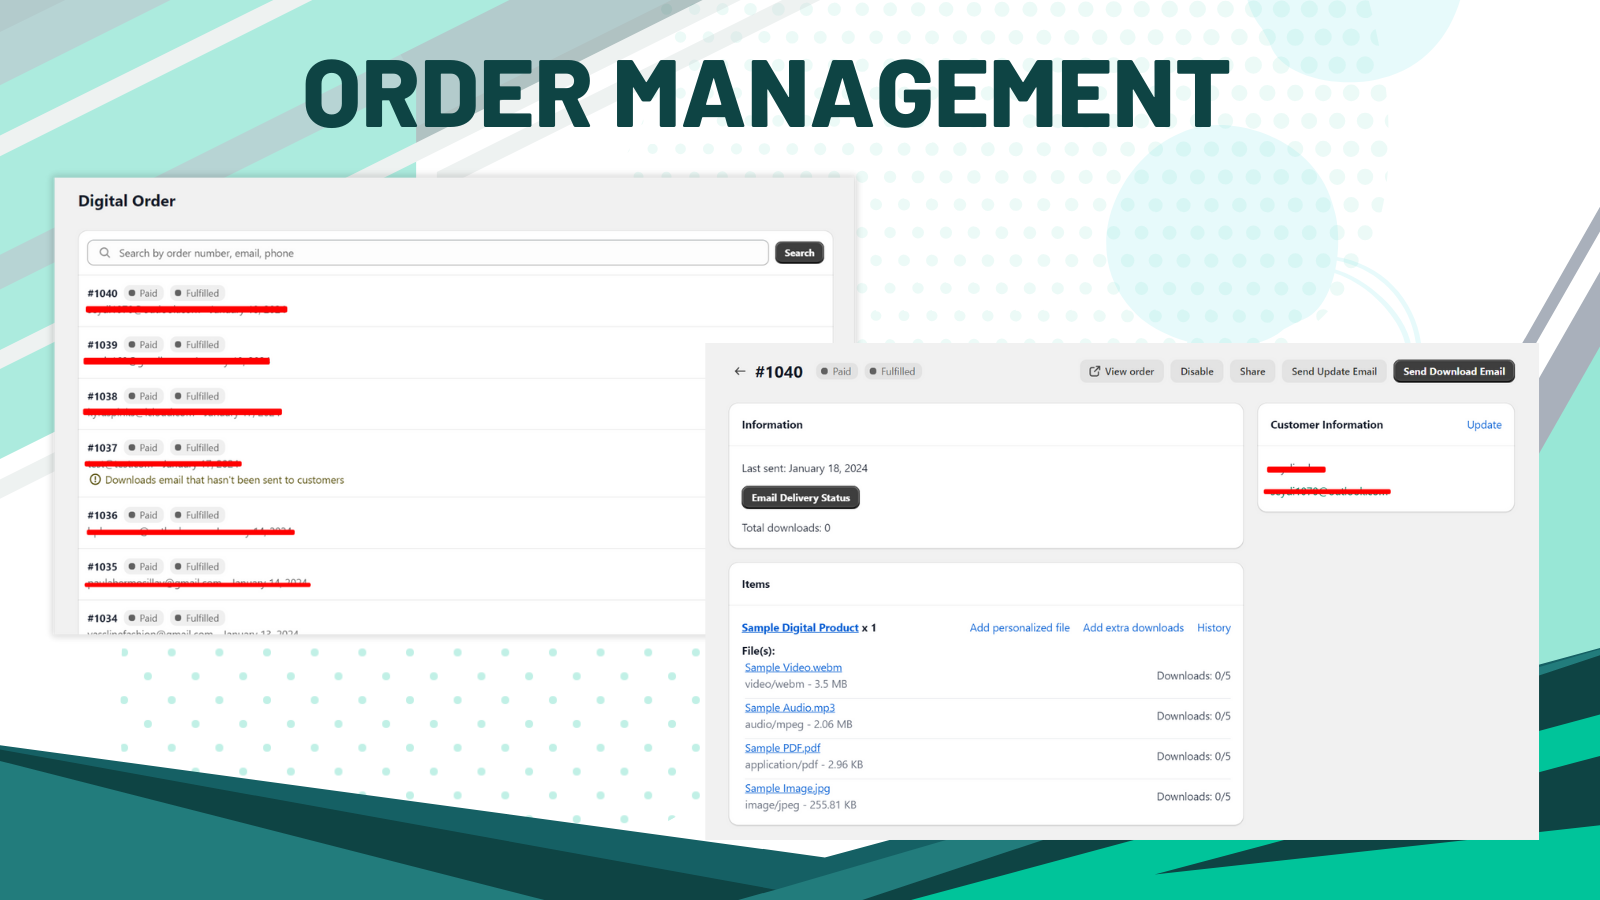 Manage orders and downloads easily.